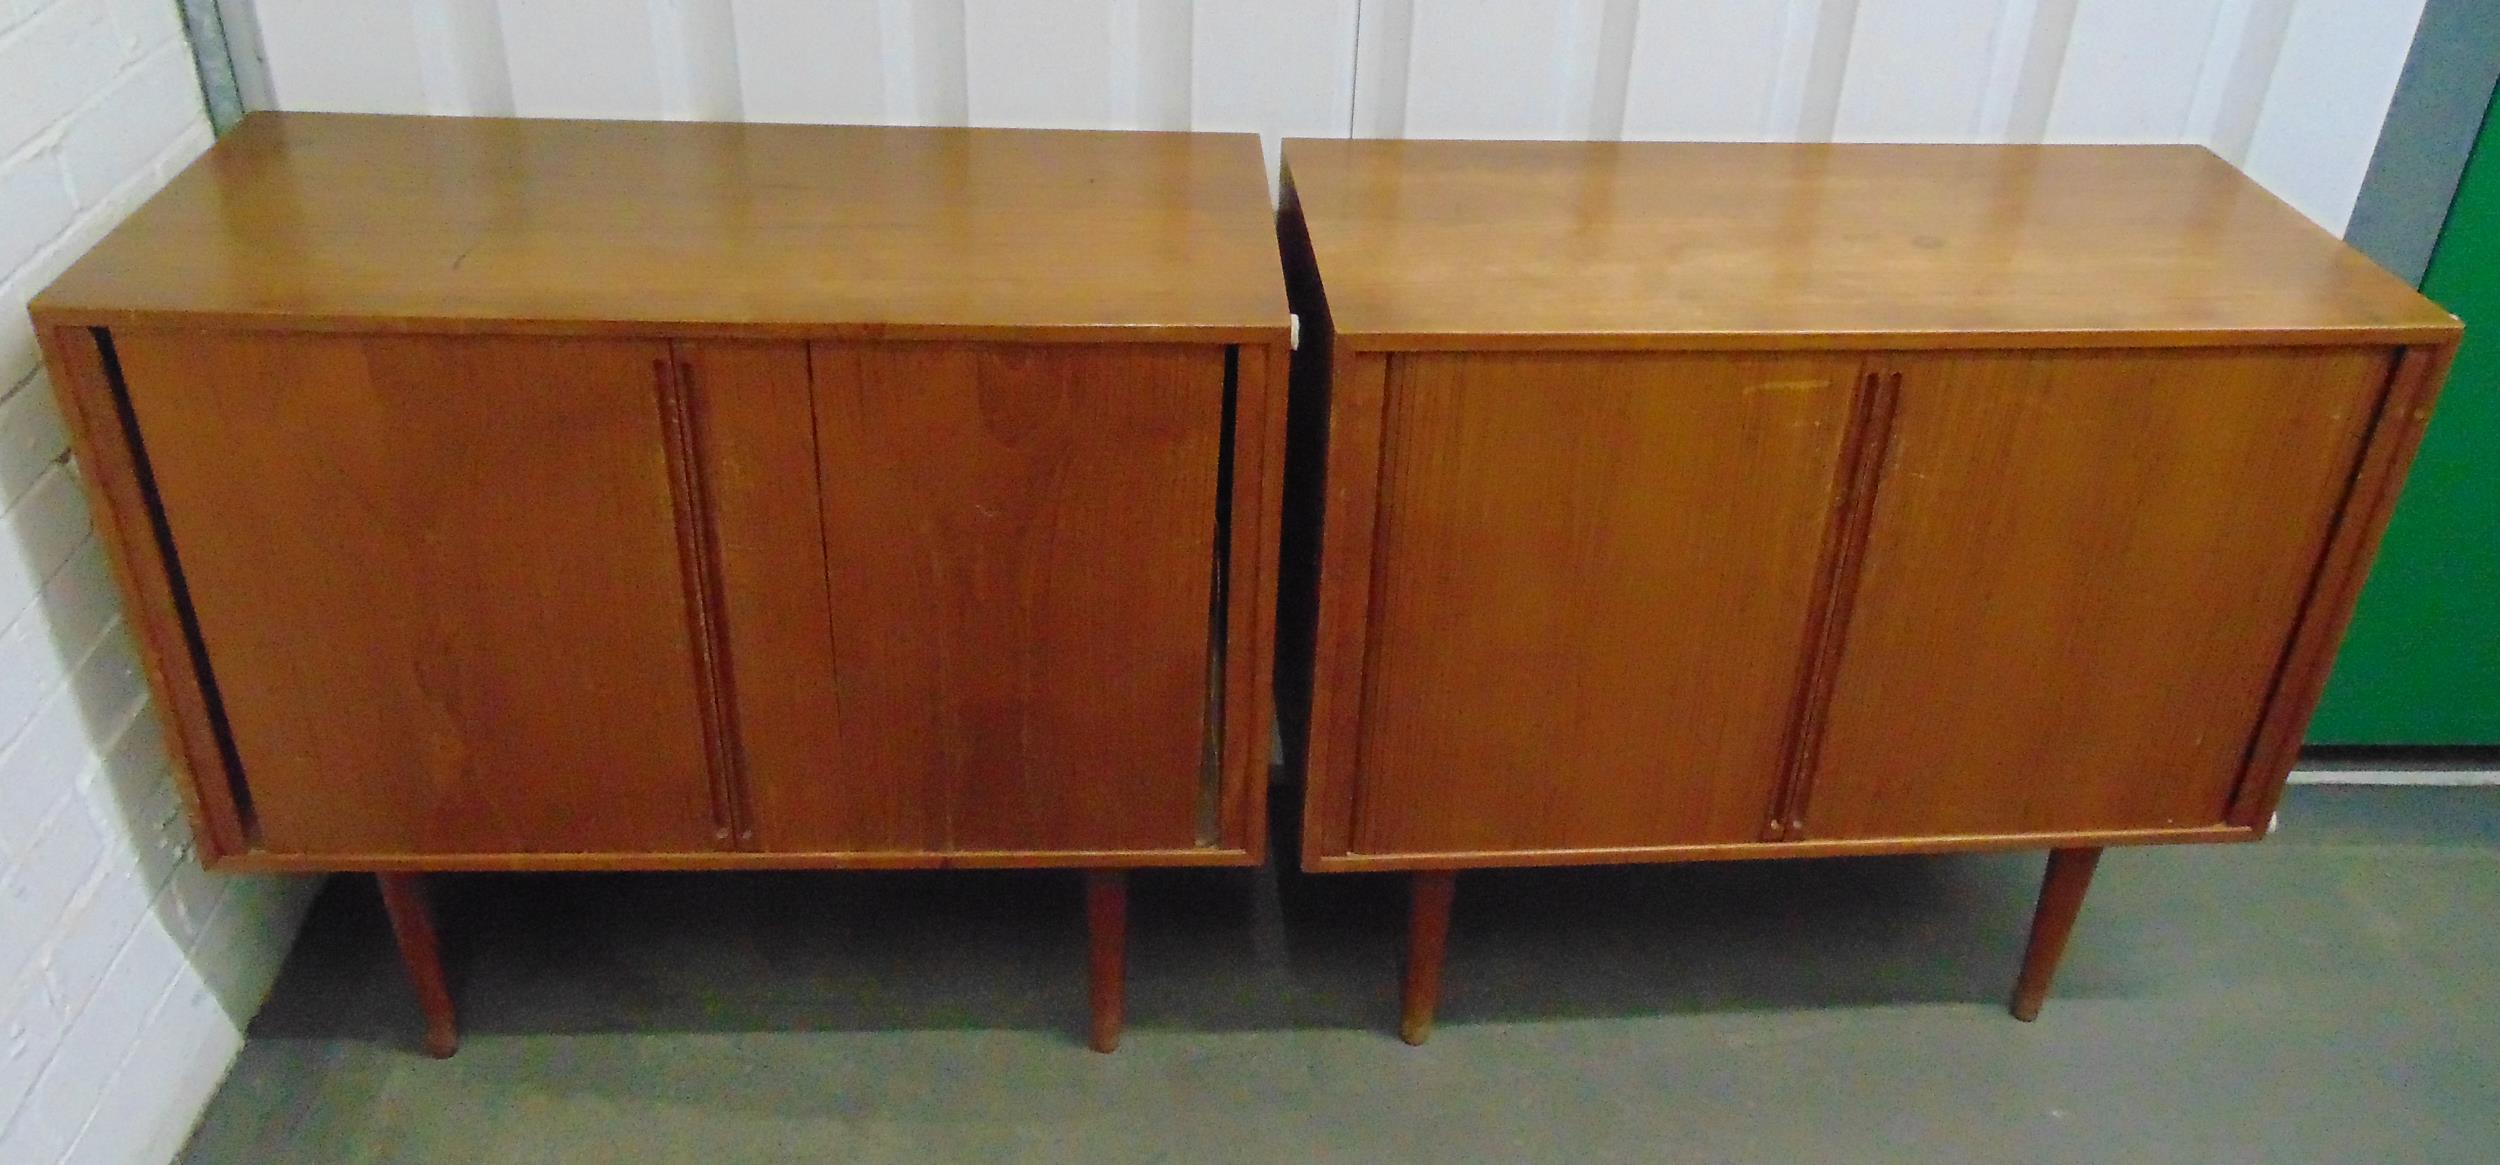 A pair of mid 20th century rectangular teak cabinets with sliding doors on four tapering cylindrical